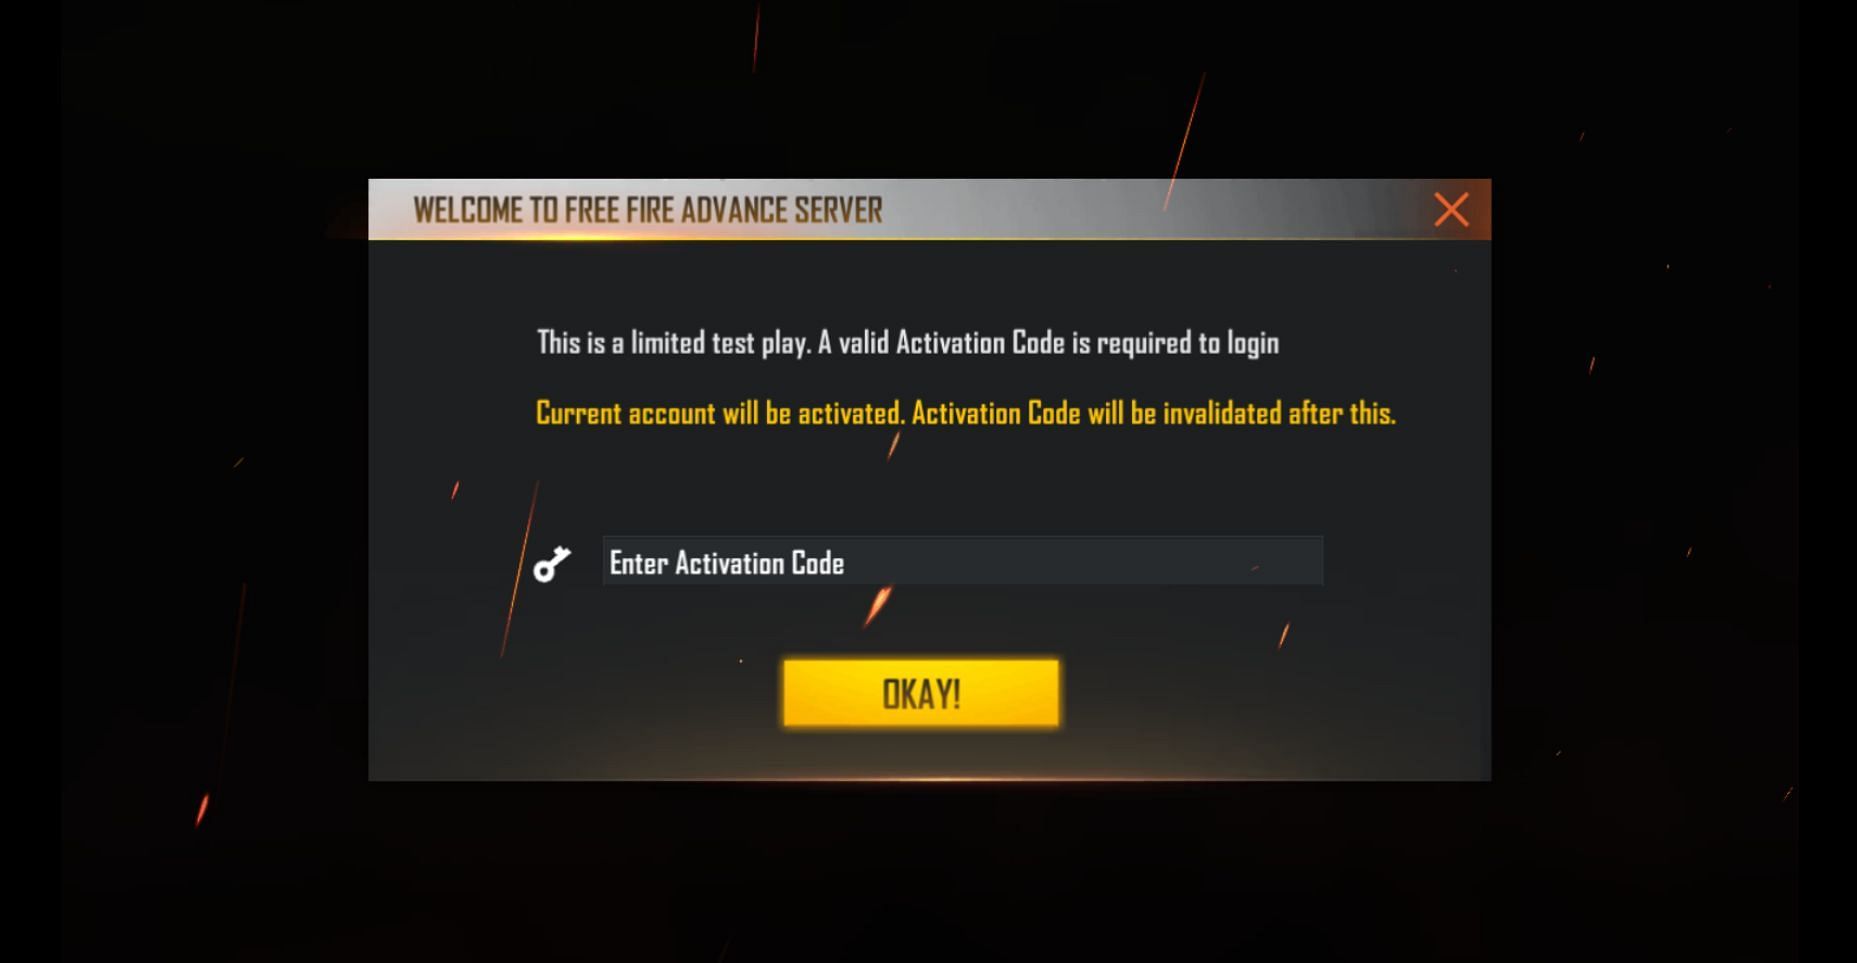 Fill in the Activation Code to gain access (Image via Garena)